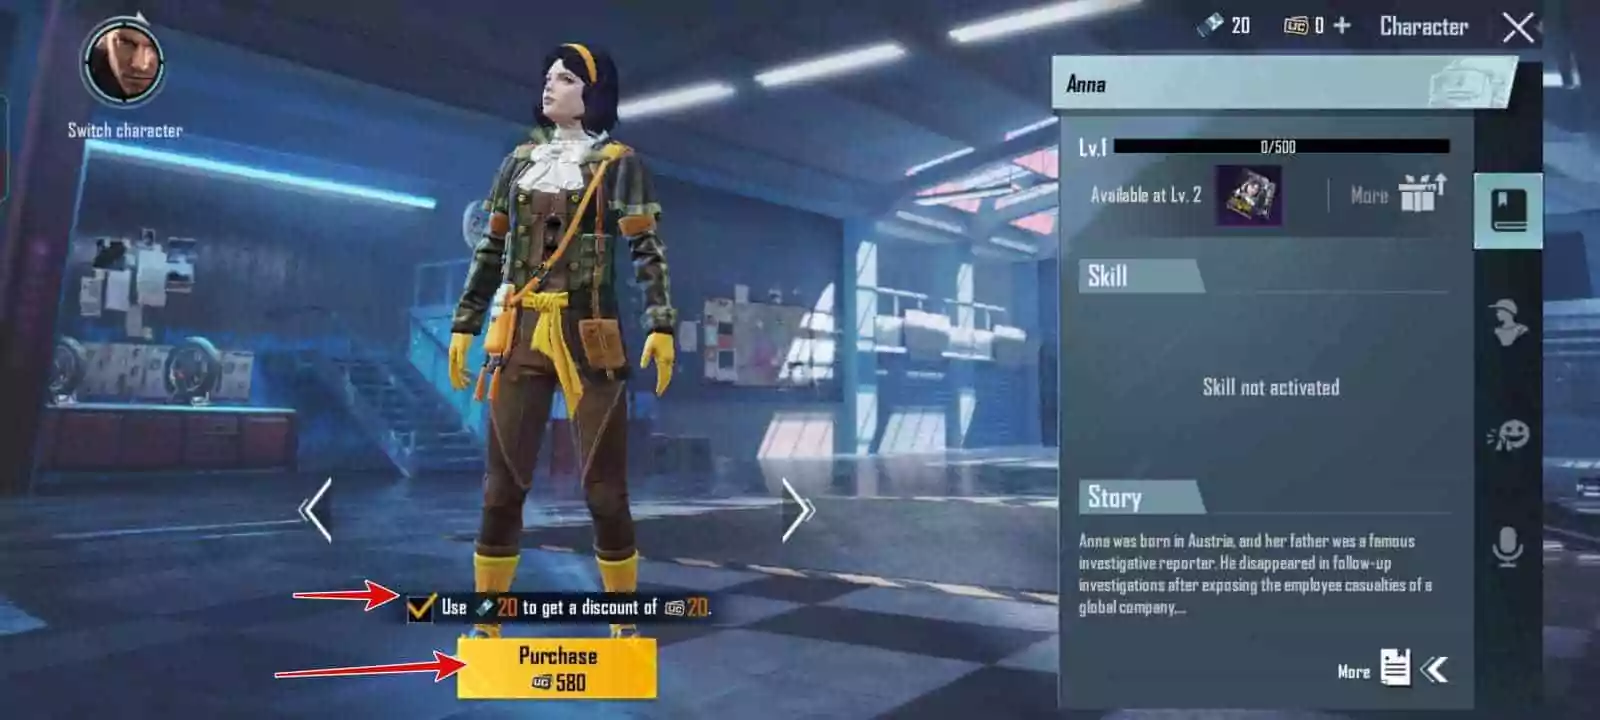 Use the arrow to change character ></noscript> Click Purchase”></li>



<li>If you have sufficient Voucher, the chosen character will be unlocked</li>
</ol>



<p>This is how one can unlock and get free characters in BGMI as well as PUBG Mobile. You can look for more events like this and some of the free characters by using this character’s voucher card. In case you have any issues, please let us know in the below comments. </p>



<h2 class=